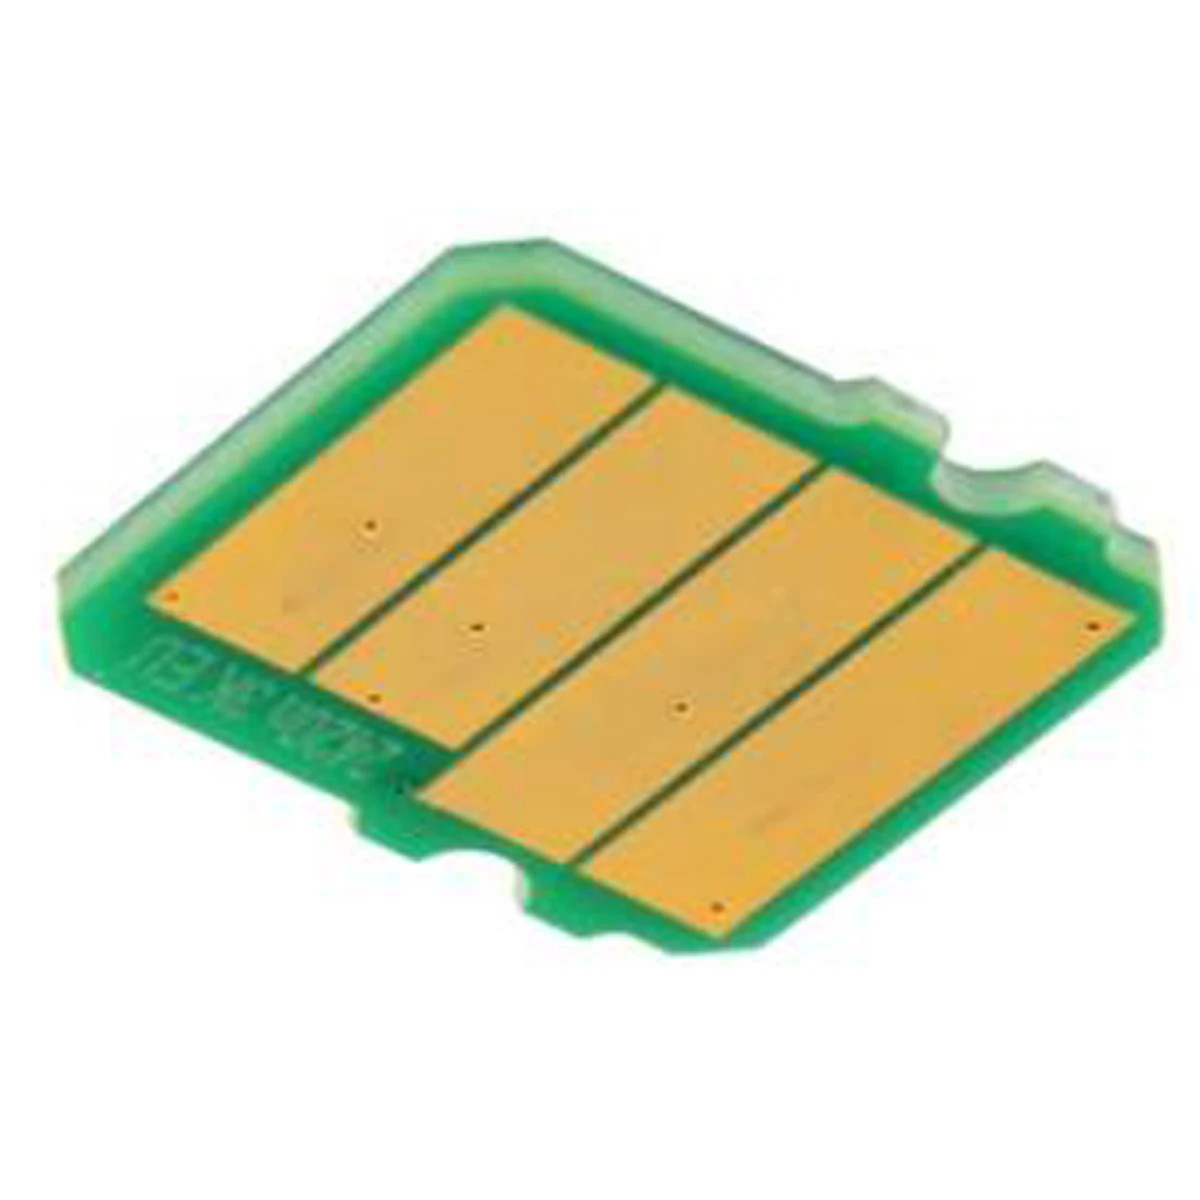 

Toner Chip for Brother DCP L2372DN MFC L2712DN L2712DW L2732DW L2752DW DCPL-2512D DCPL-2532DW DCPL-2552DN HLL-2312D HLL-2352DW